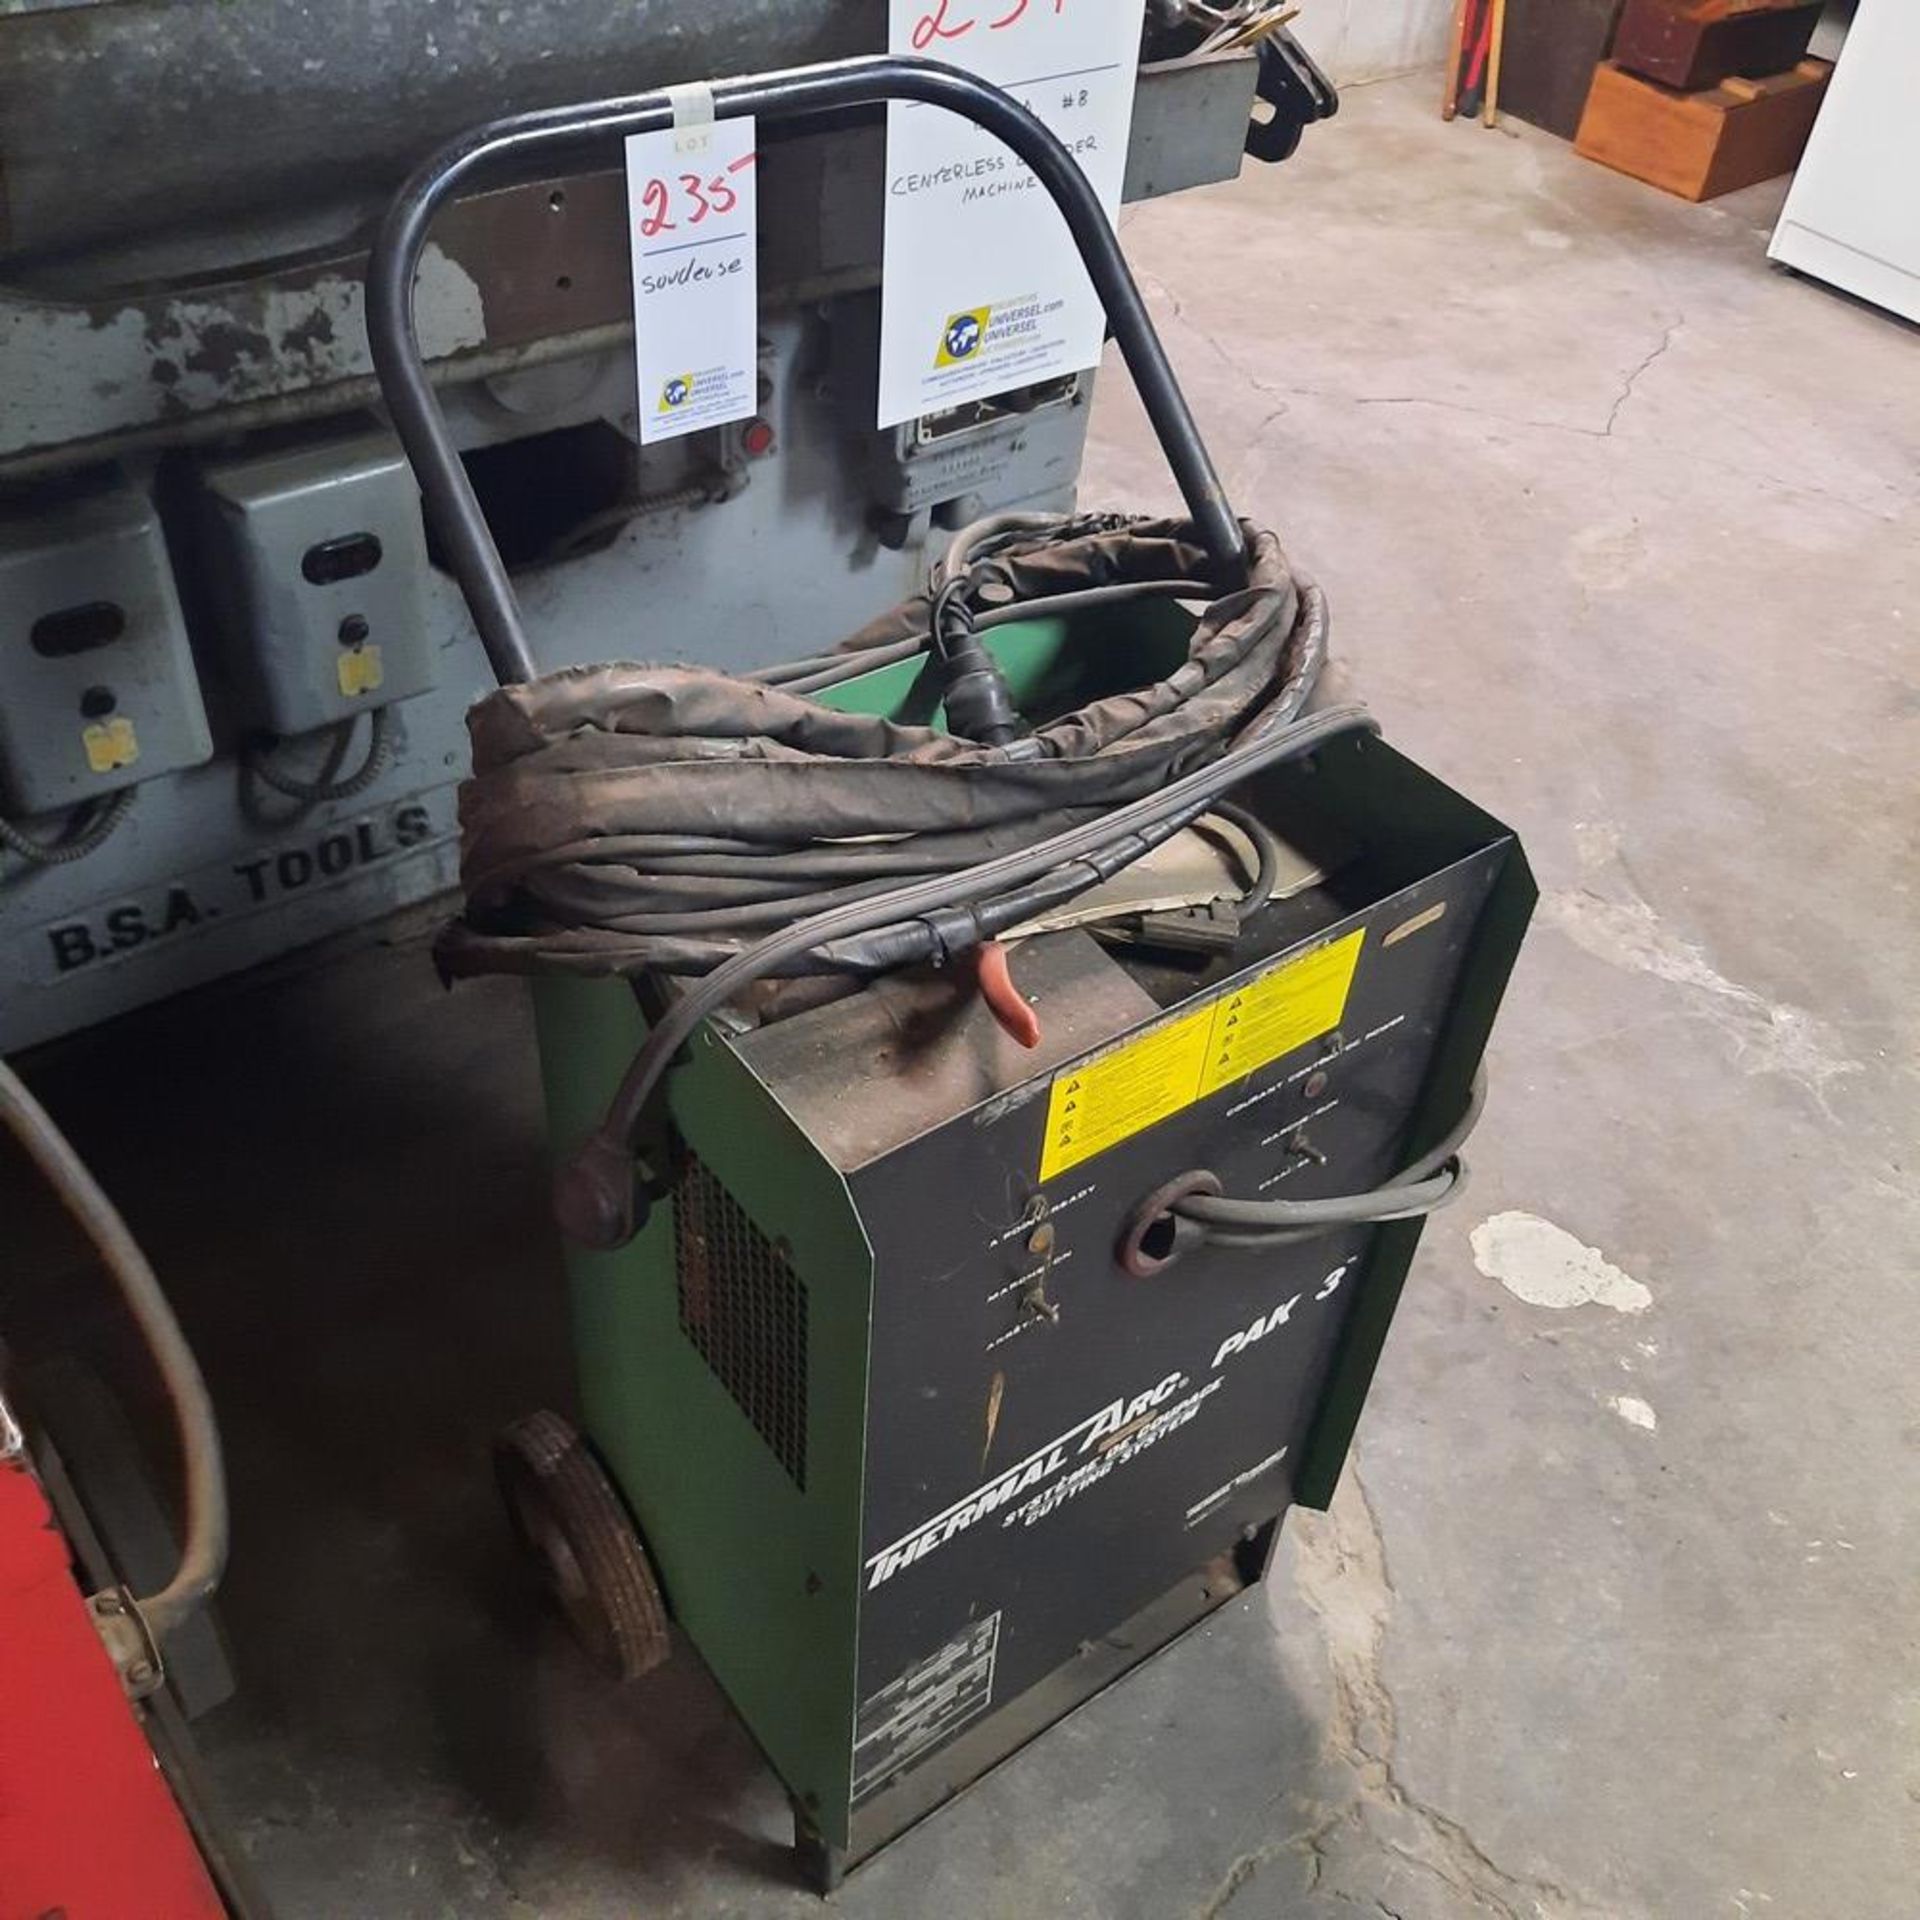 Mobile THERMAL ARC Welding Machine, c/w Access. - Image 2 of 4